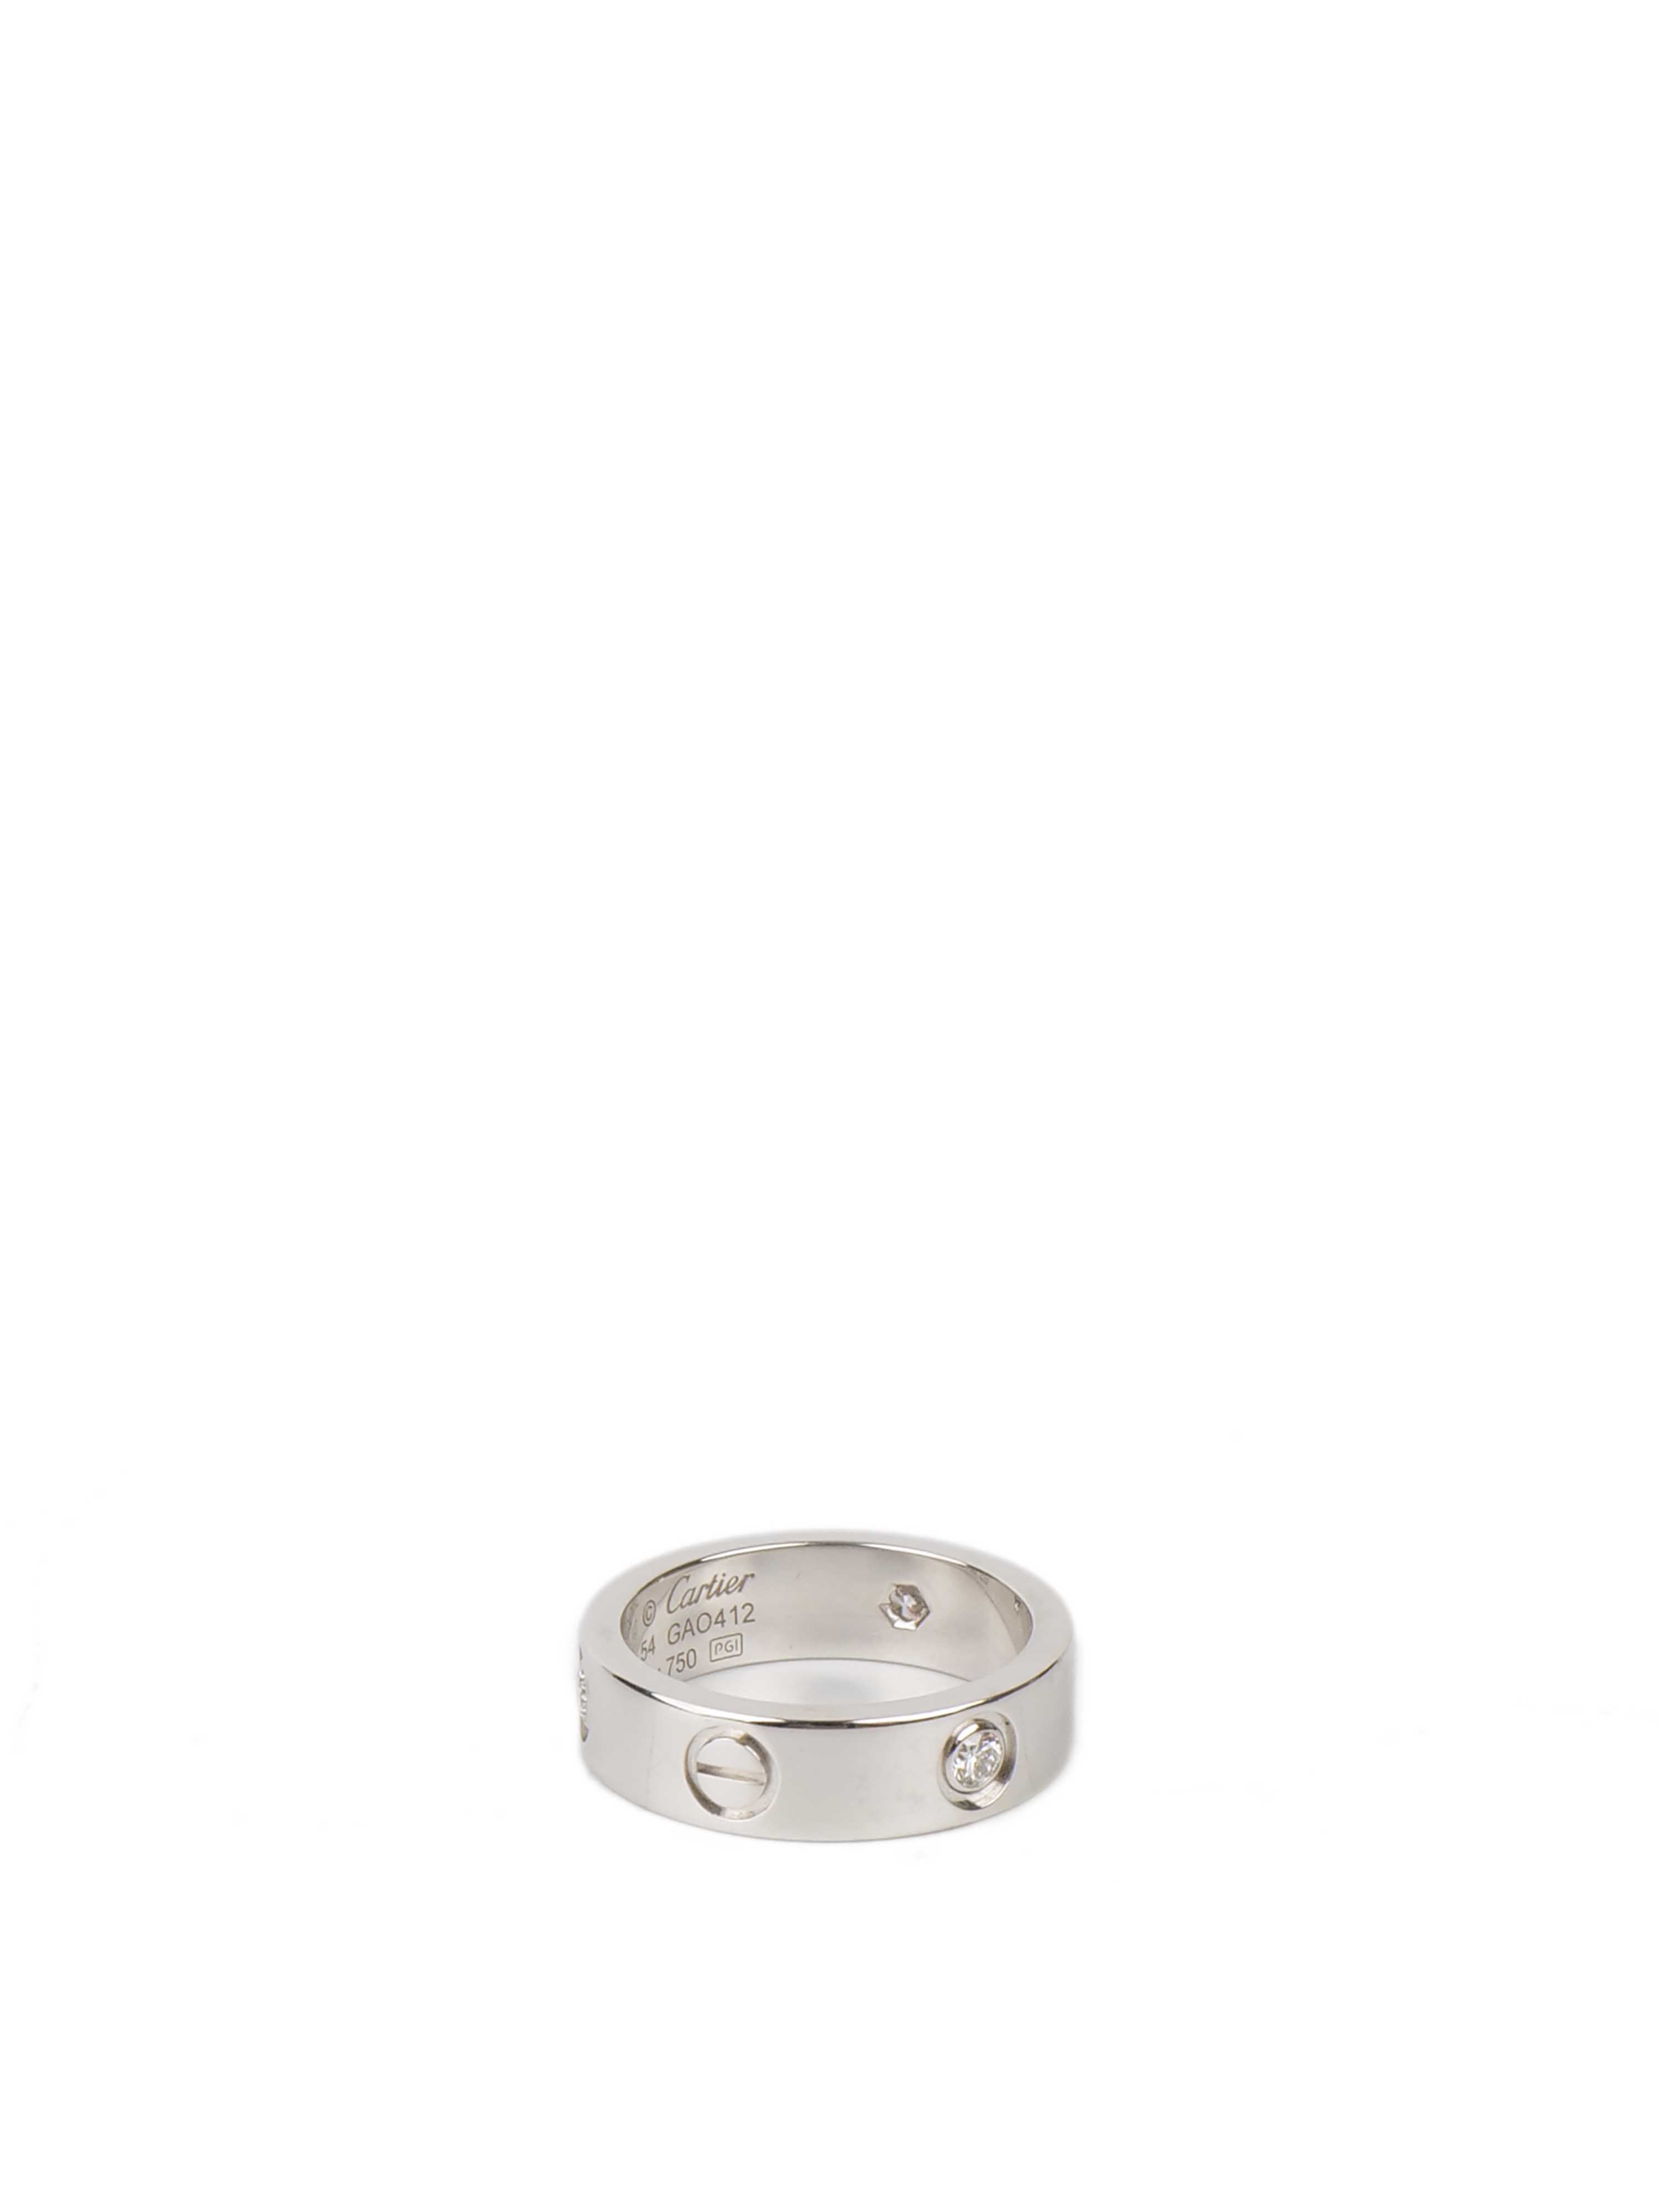 Cartier 18K White Gold Love Ring with 3 Diamonds.